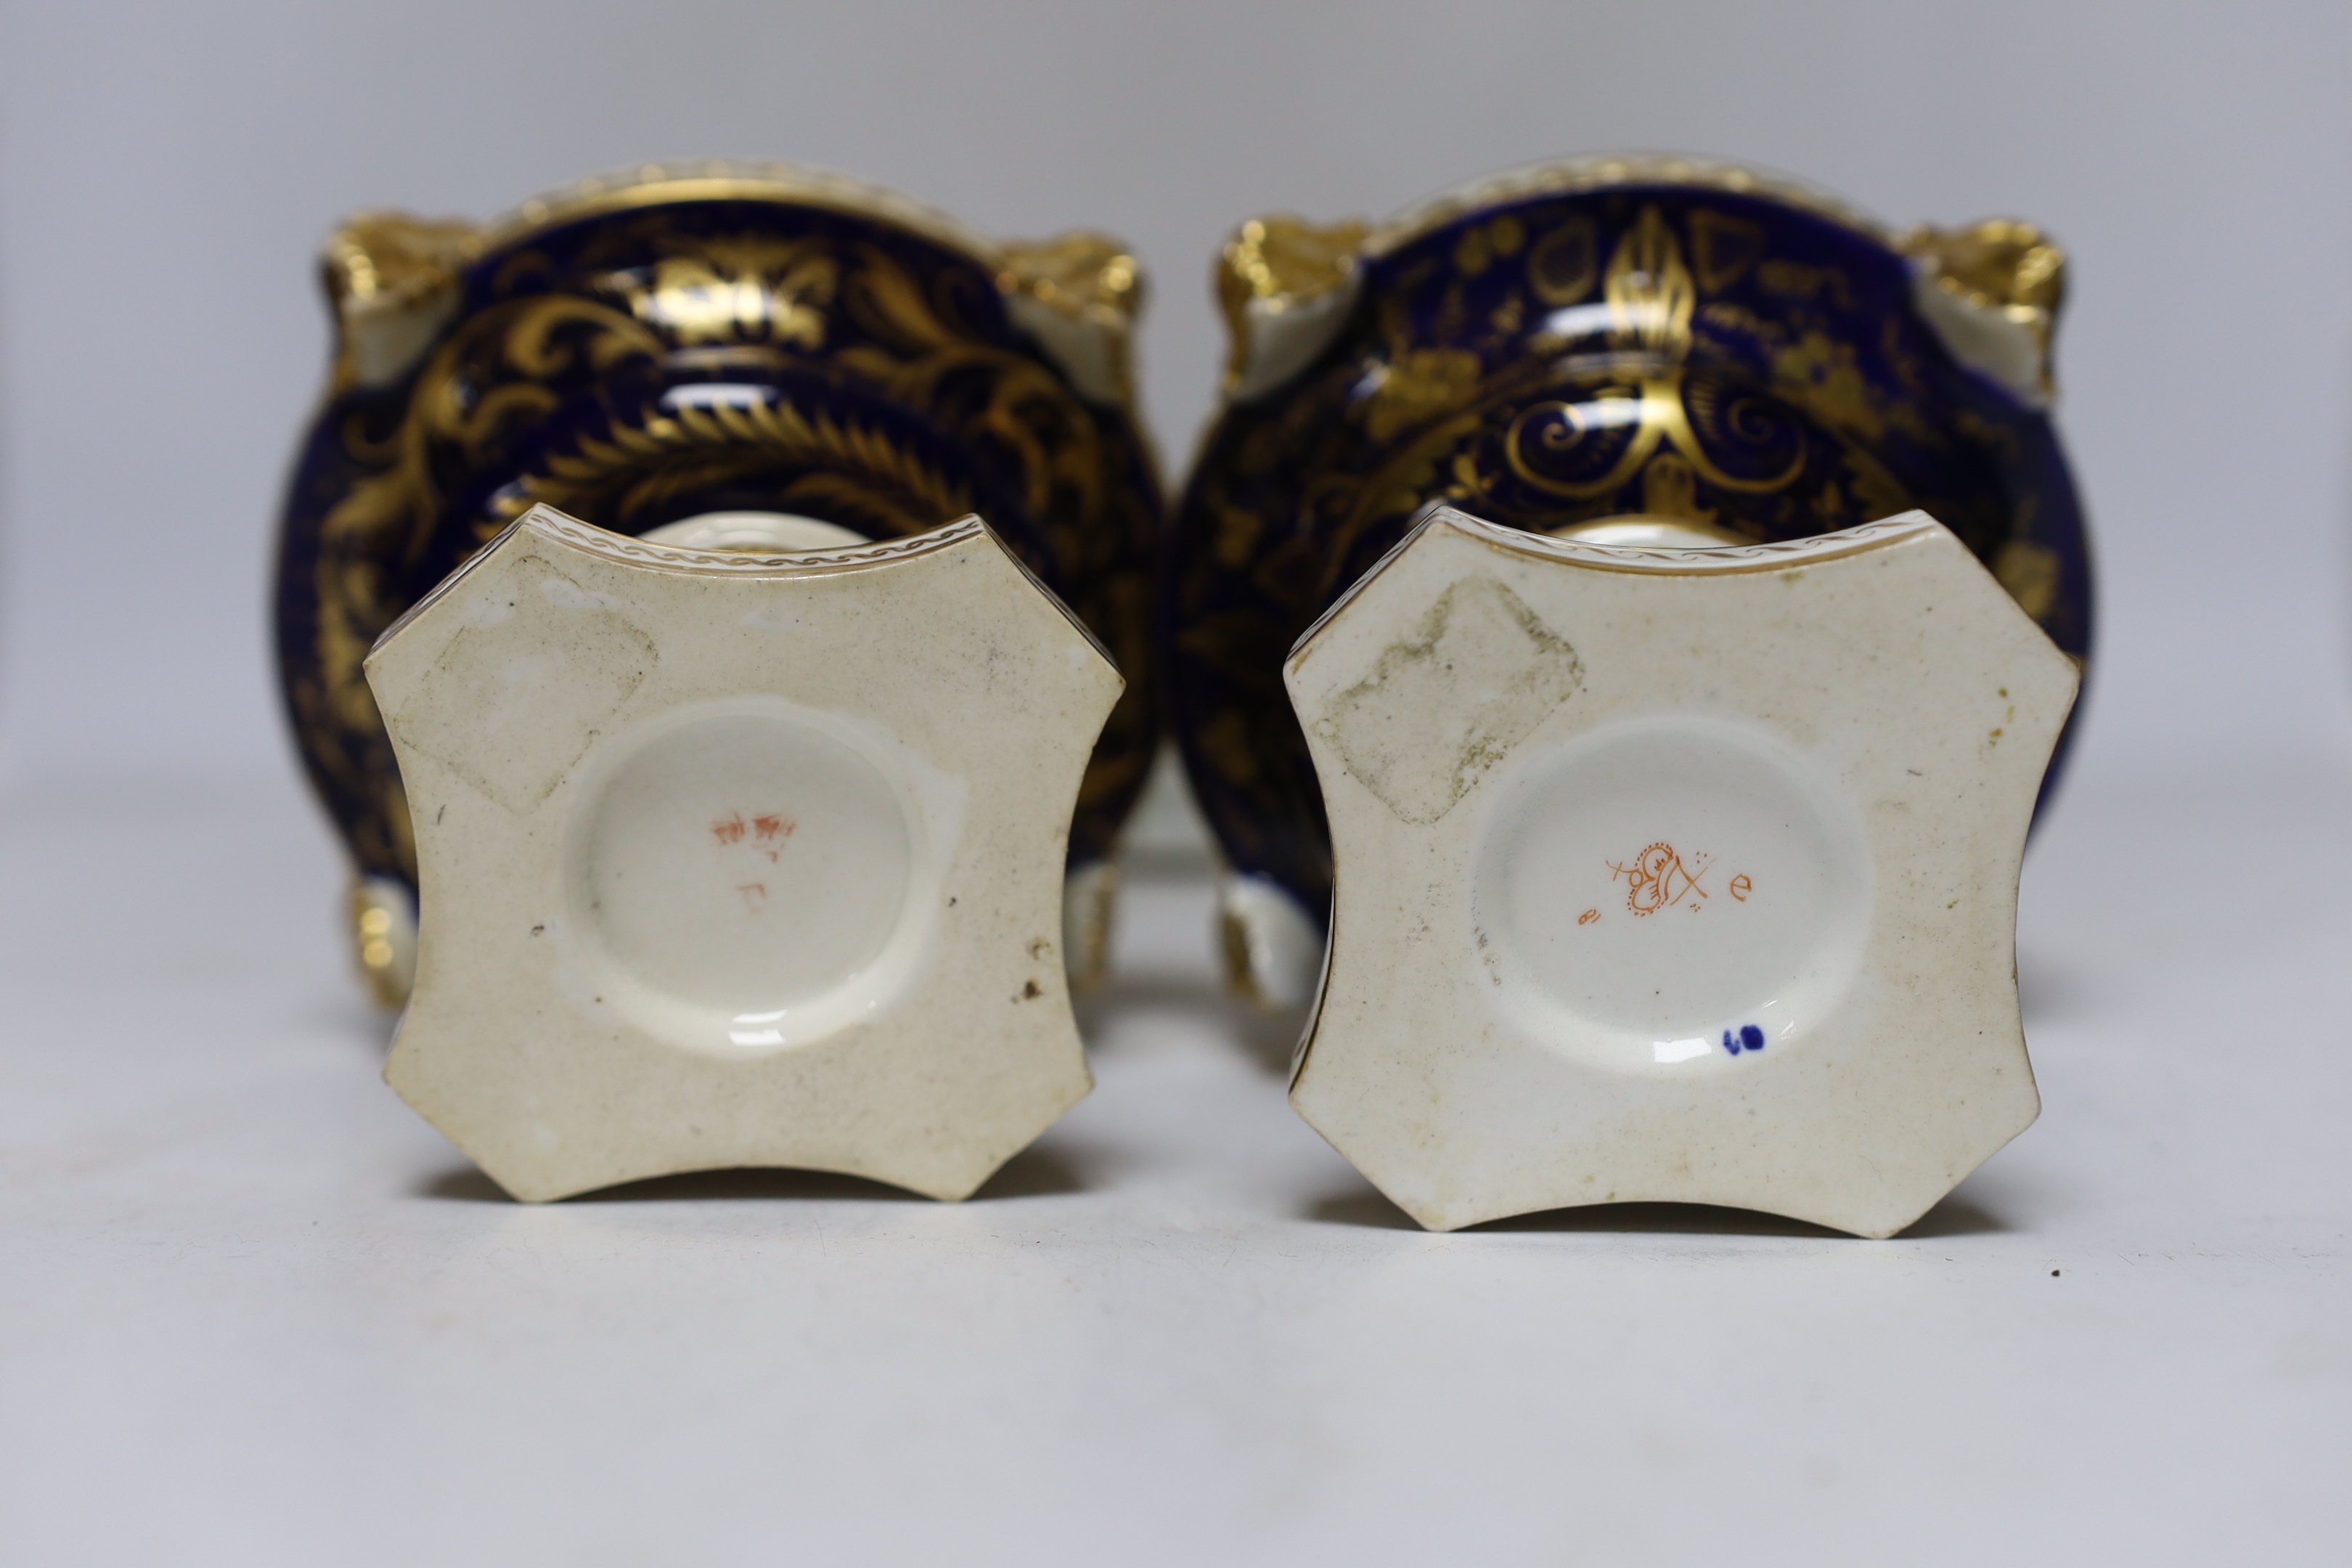 A pair of 19th century Derby pot pourri, a Wedgwood Imari dish, an early 19th century Paris porcelain dish and a Limoges trinket box